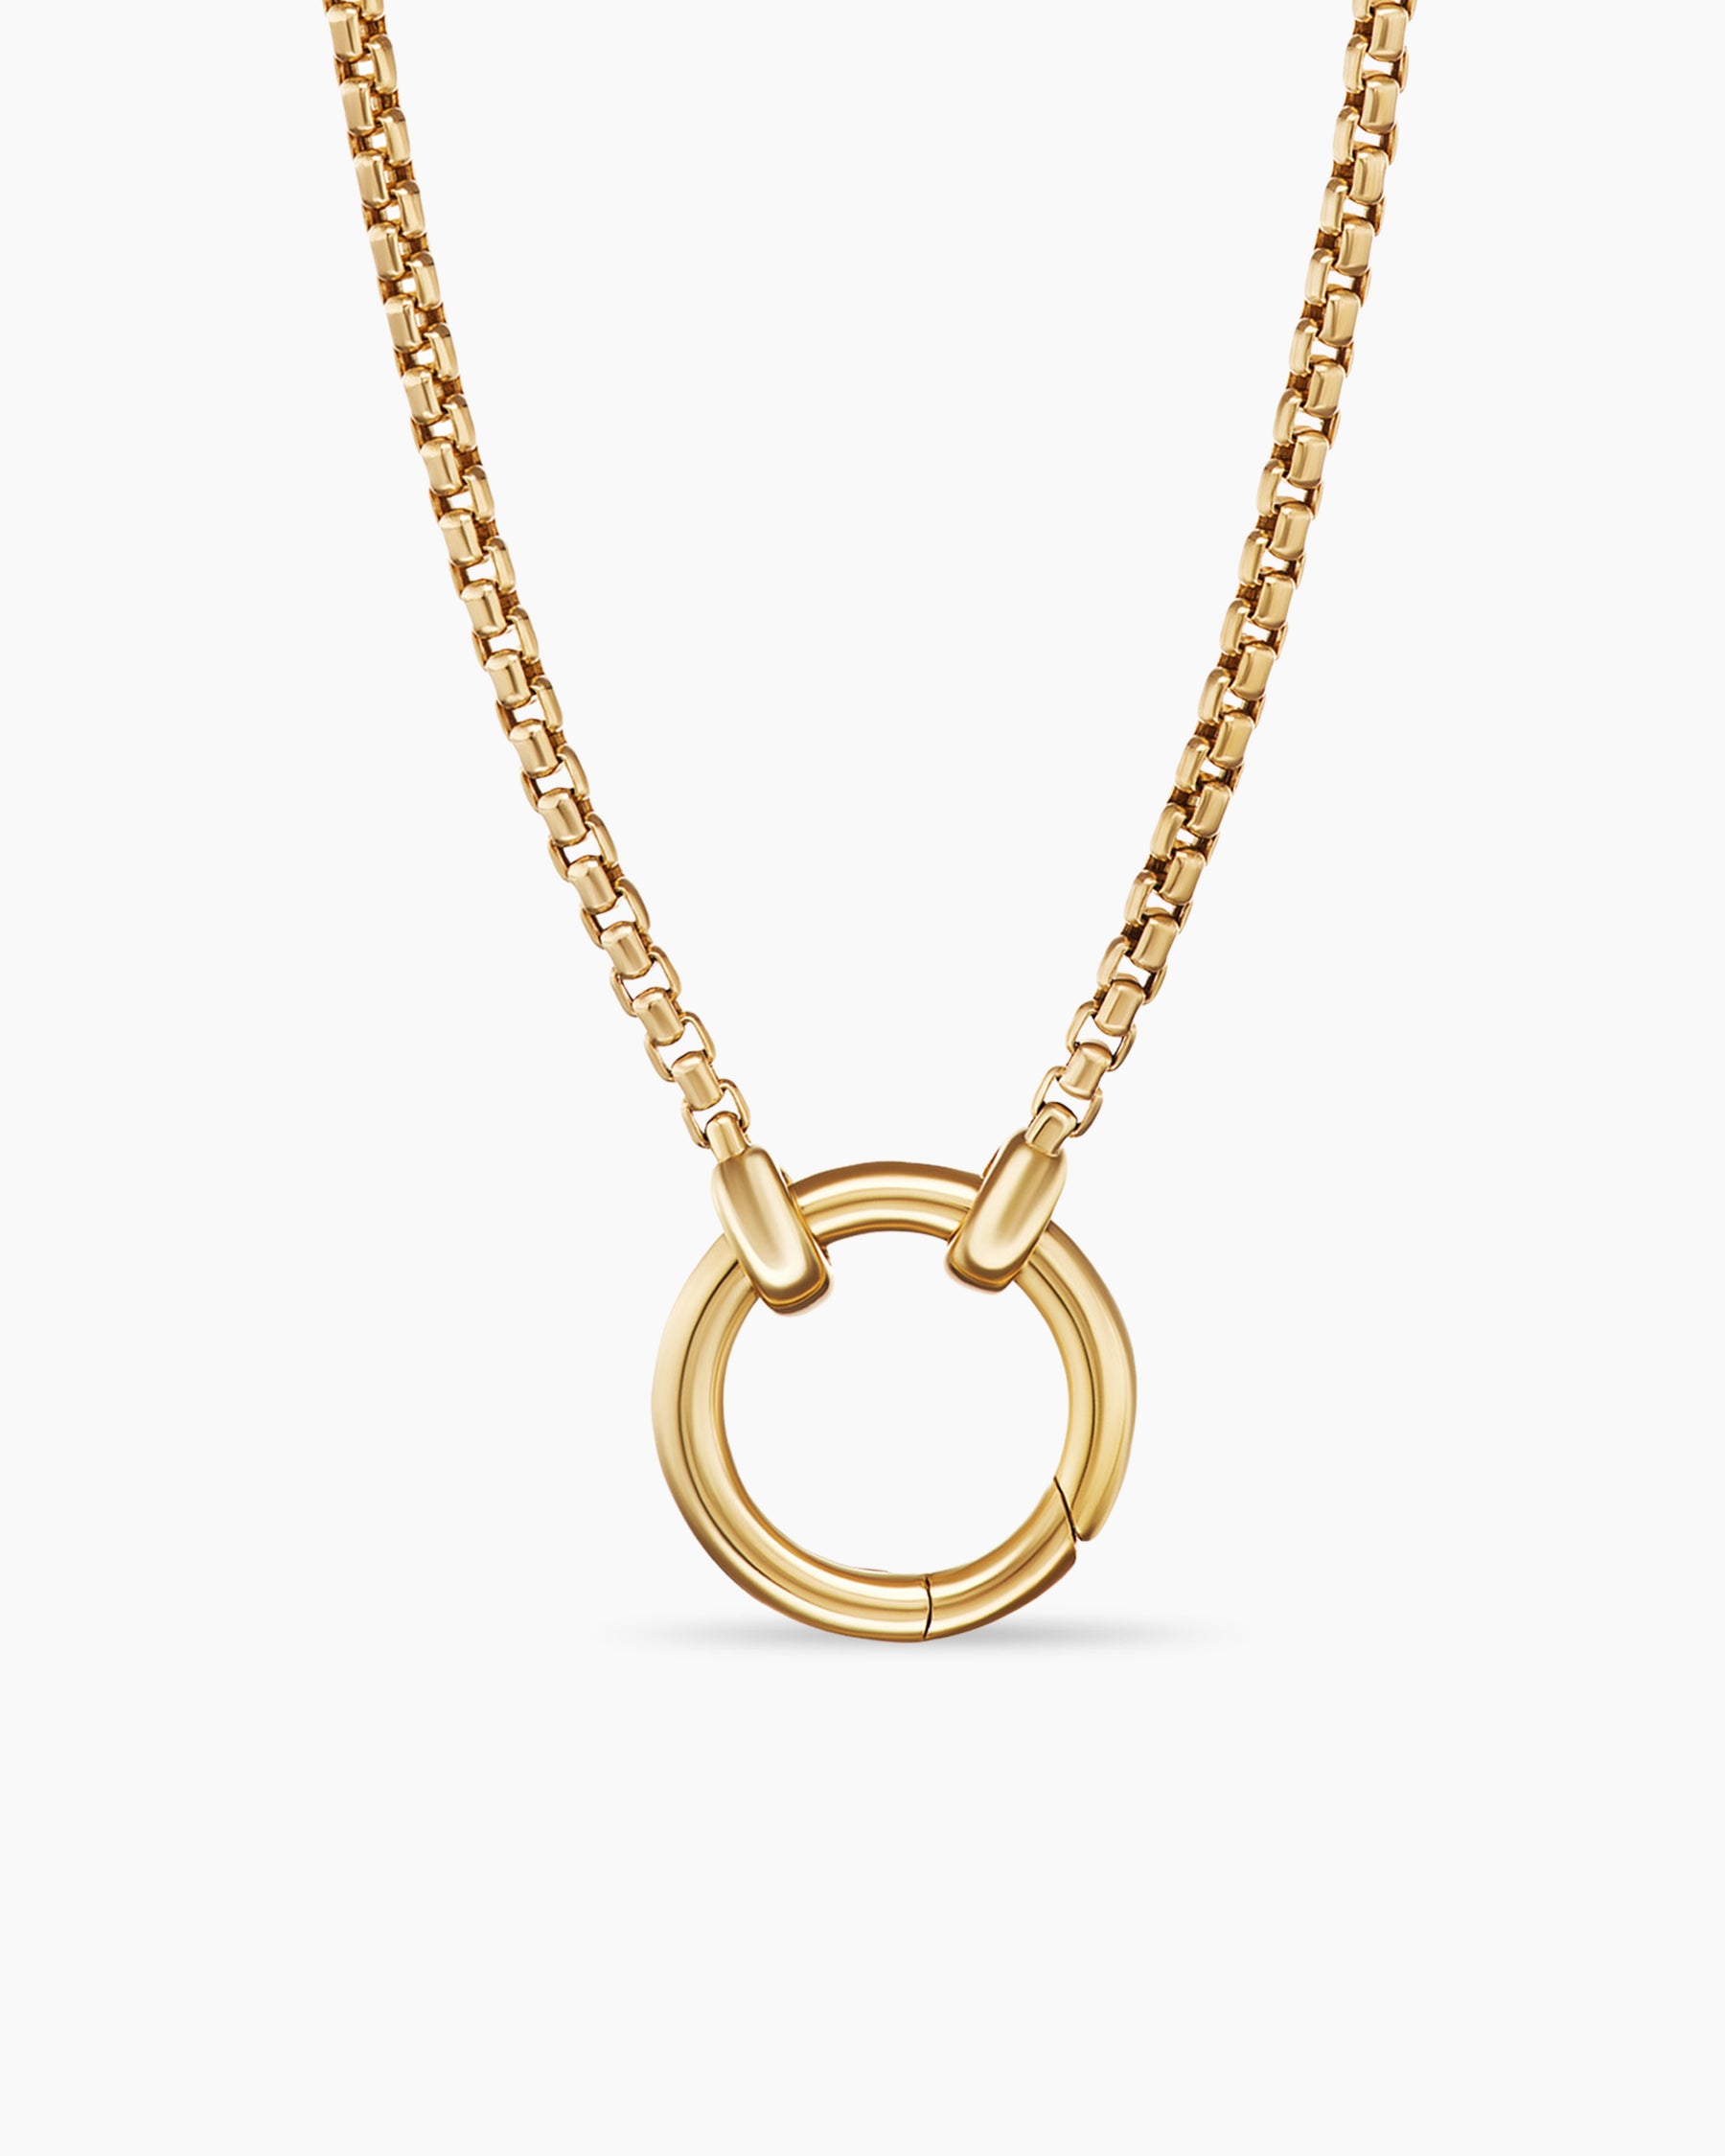 Yellow Chain 1.75mm Vehicle Yurman Necklace Gold, David Amulet 18K in Smooth | Box